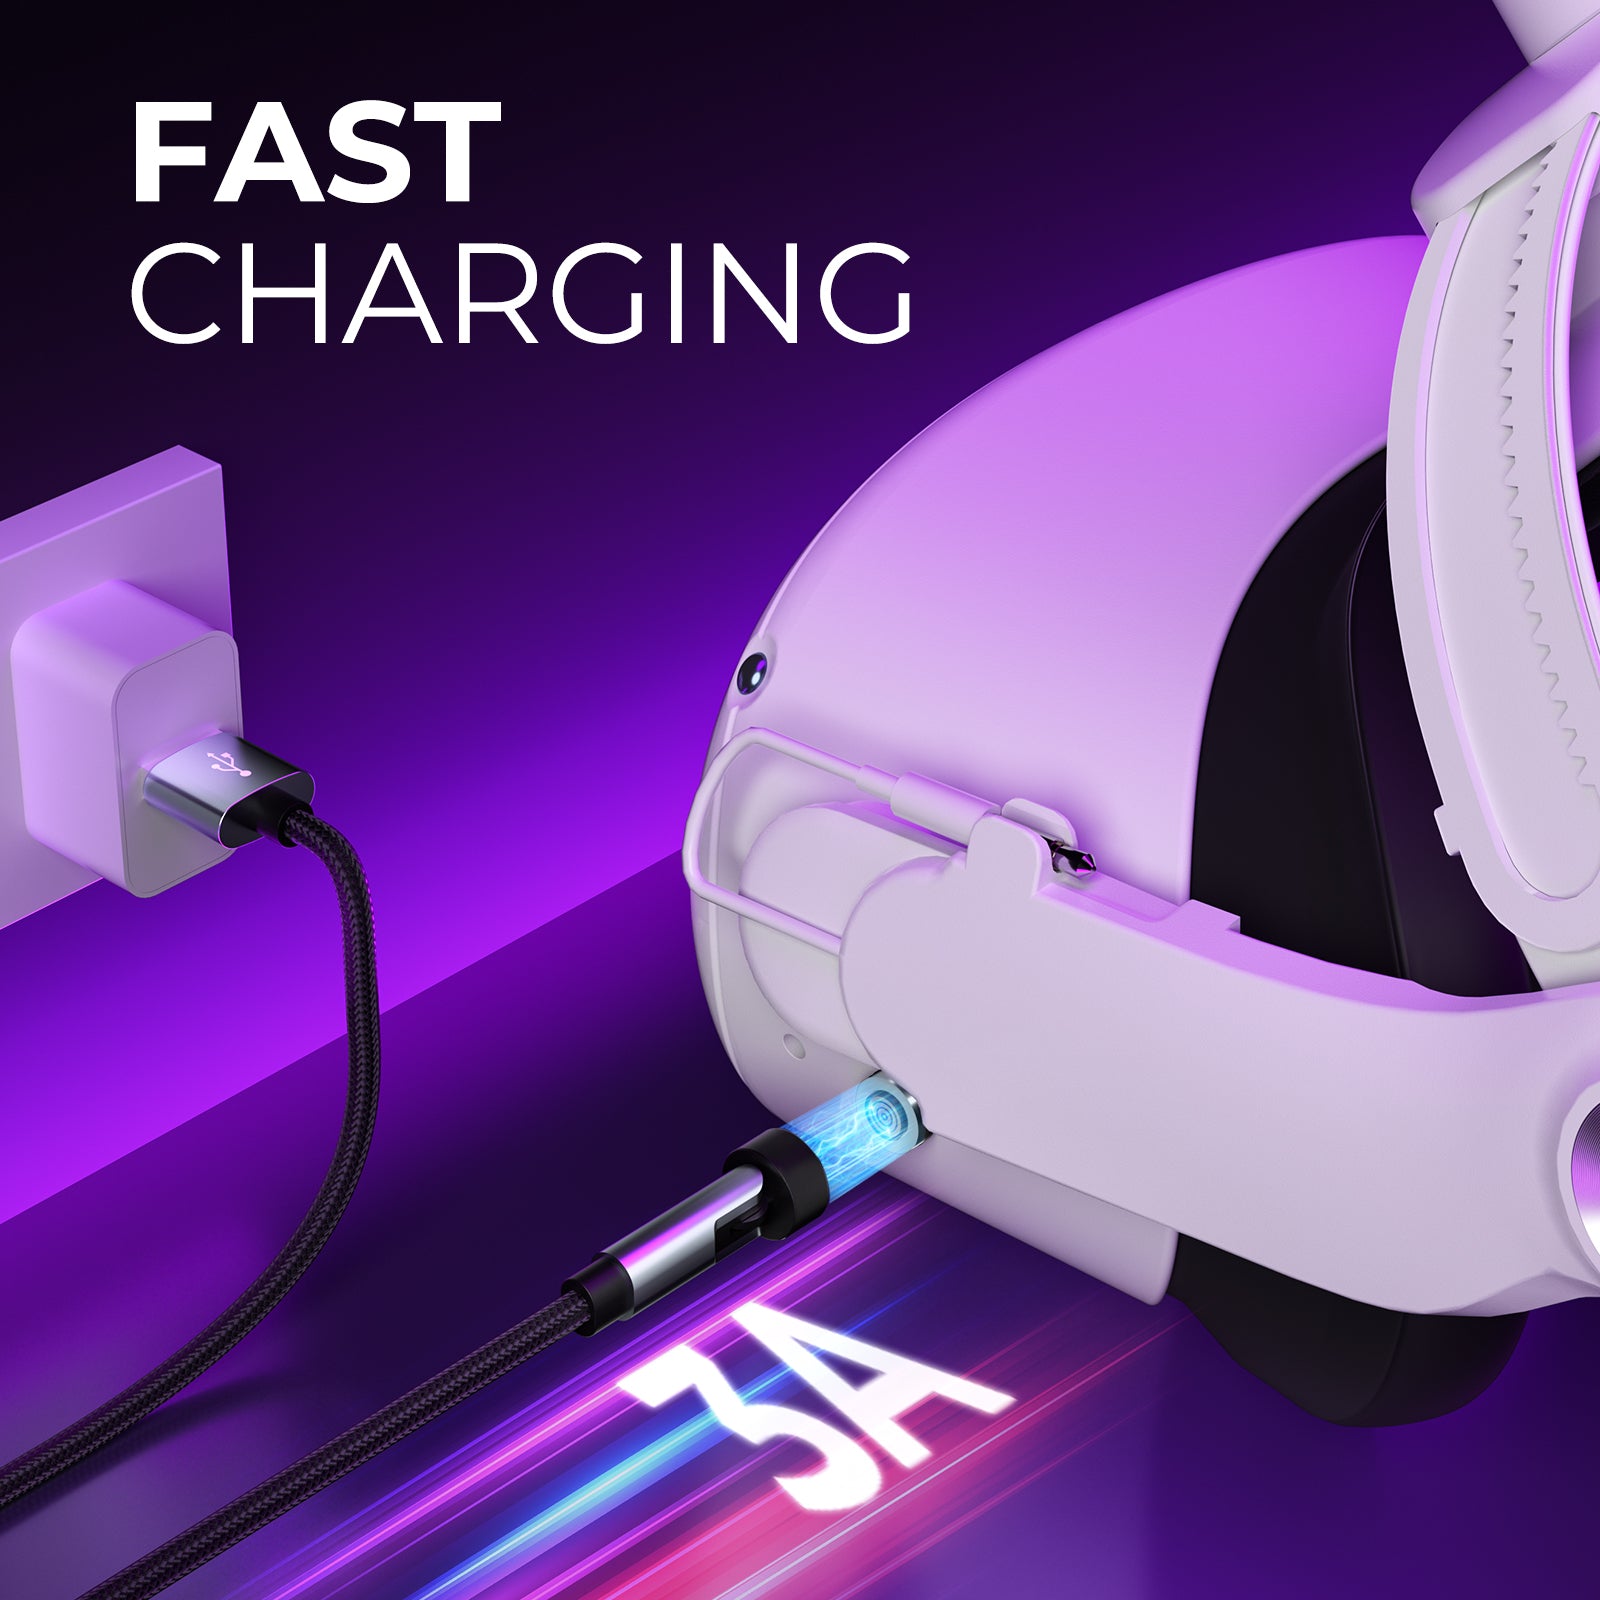 Magnetic Charging Cable for Meta/Oculus Quest 2, VR Charger Cable Support 3A Fast Charging, Charger Cord for Quest Pro, Steam Deck, PS5, Switch Controller, 6.56 FT (Charging Head Not Included)